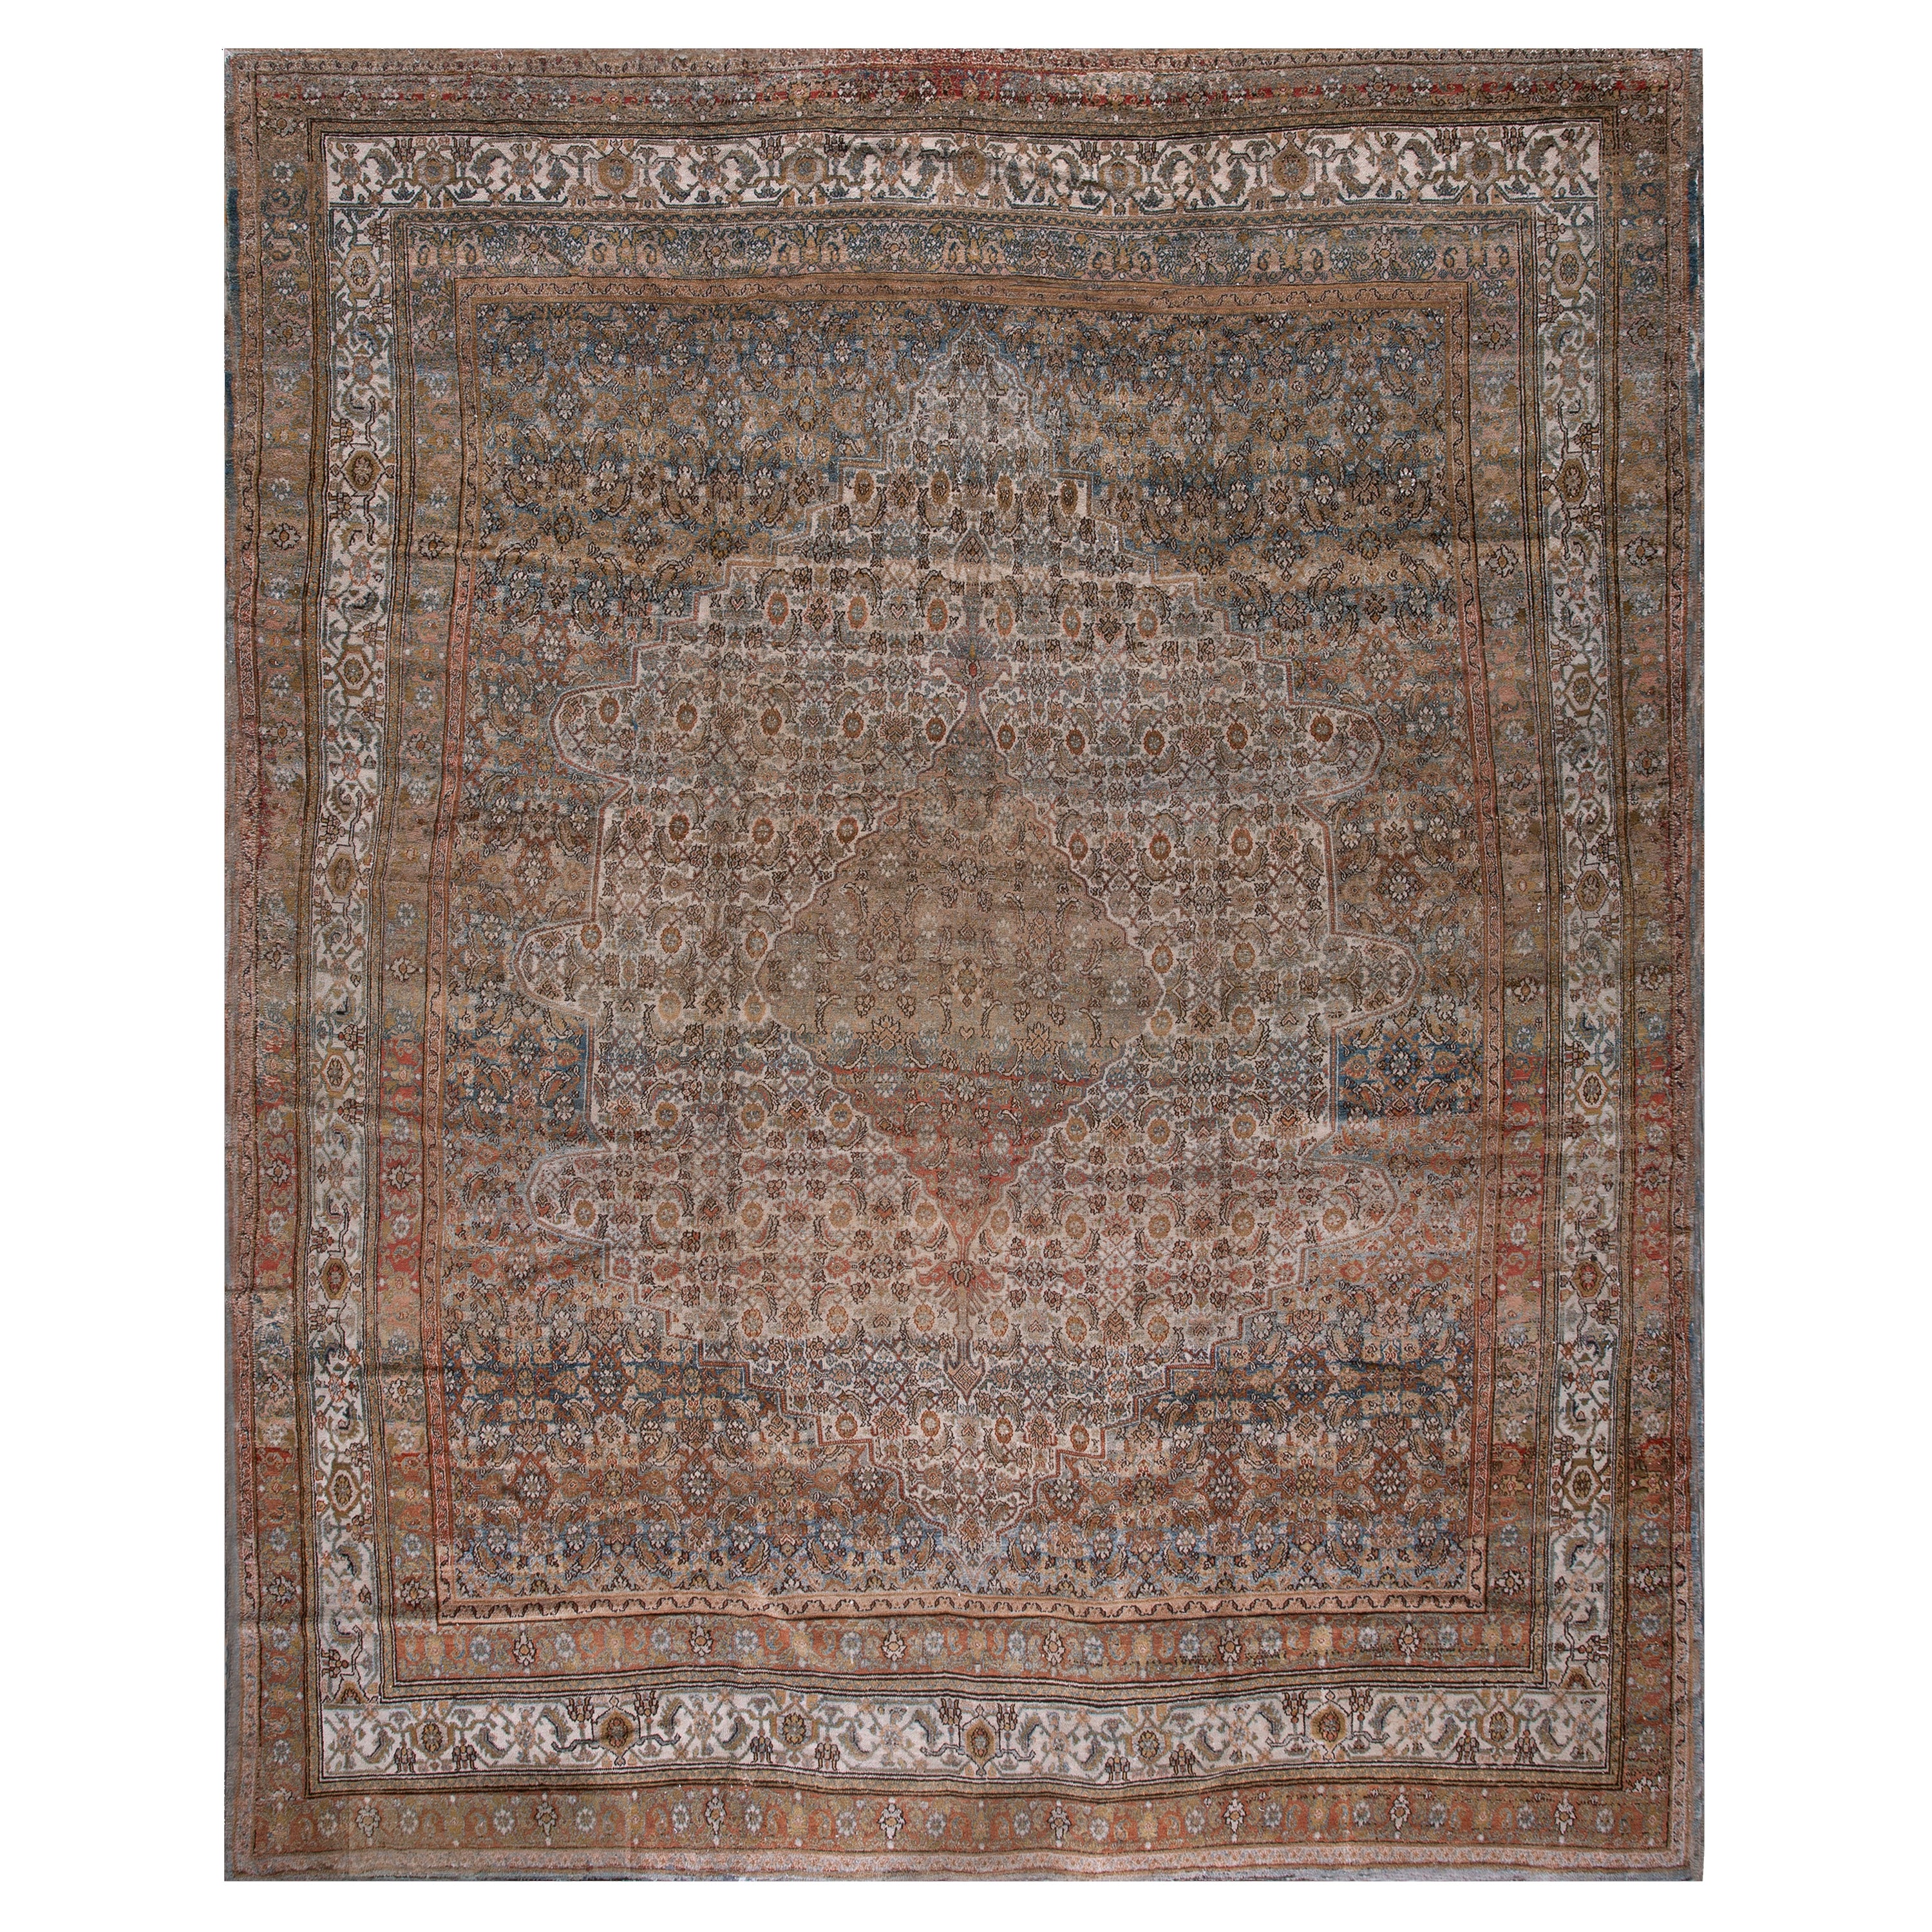 Early 20th Century Persian Bibikabad Carpet ( 11' x 13'9" - 335 x 420 ) For Sale